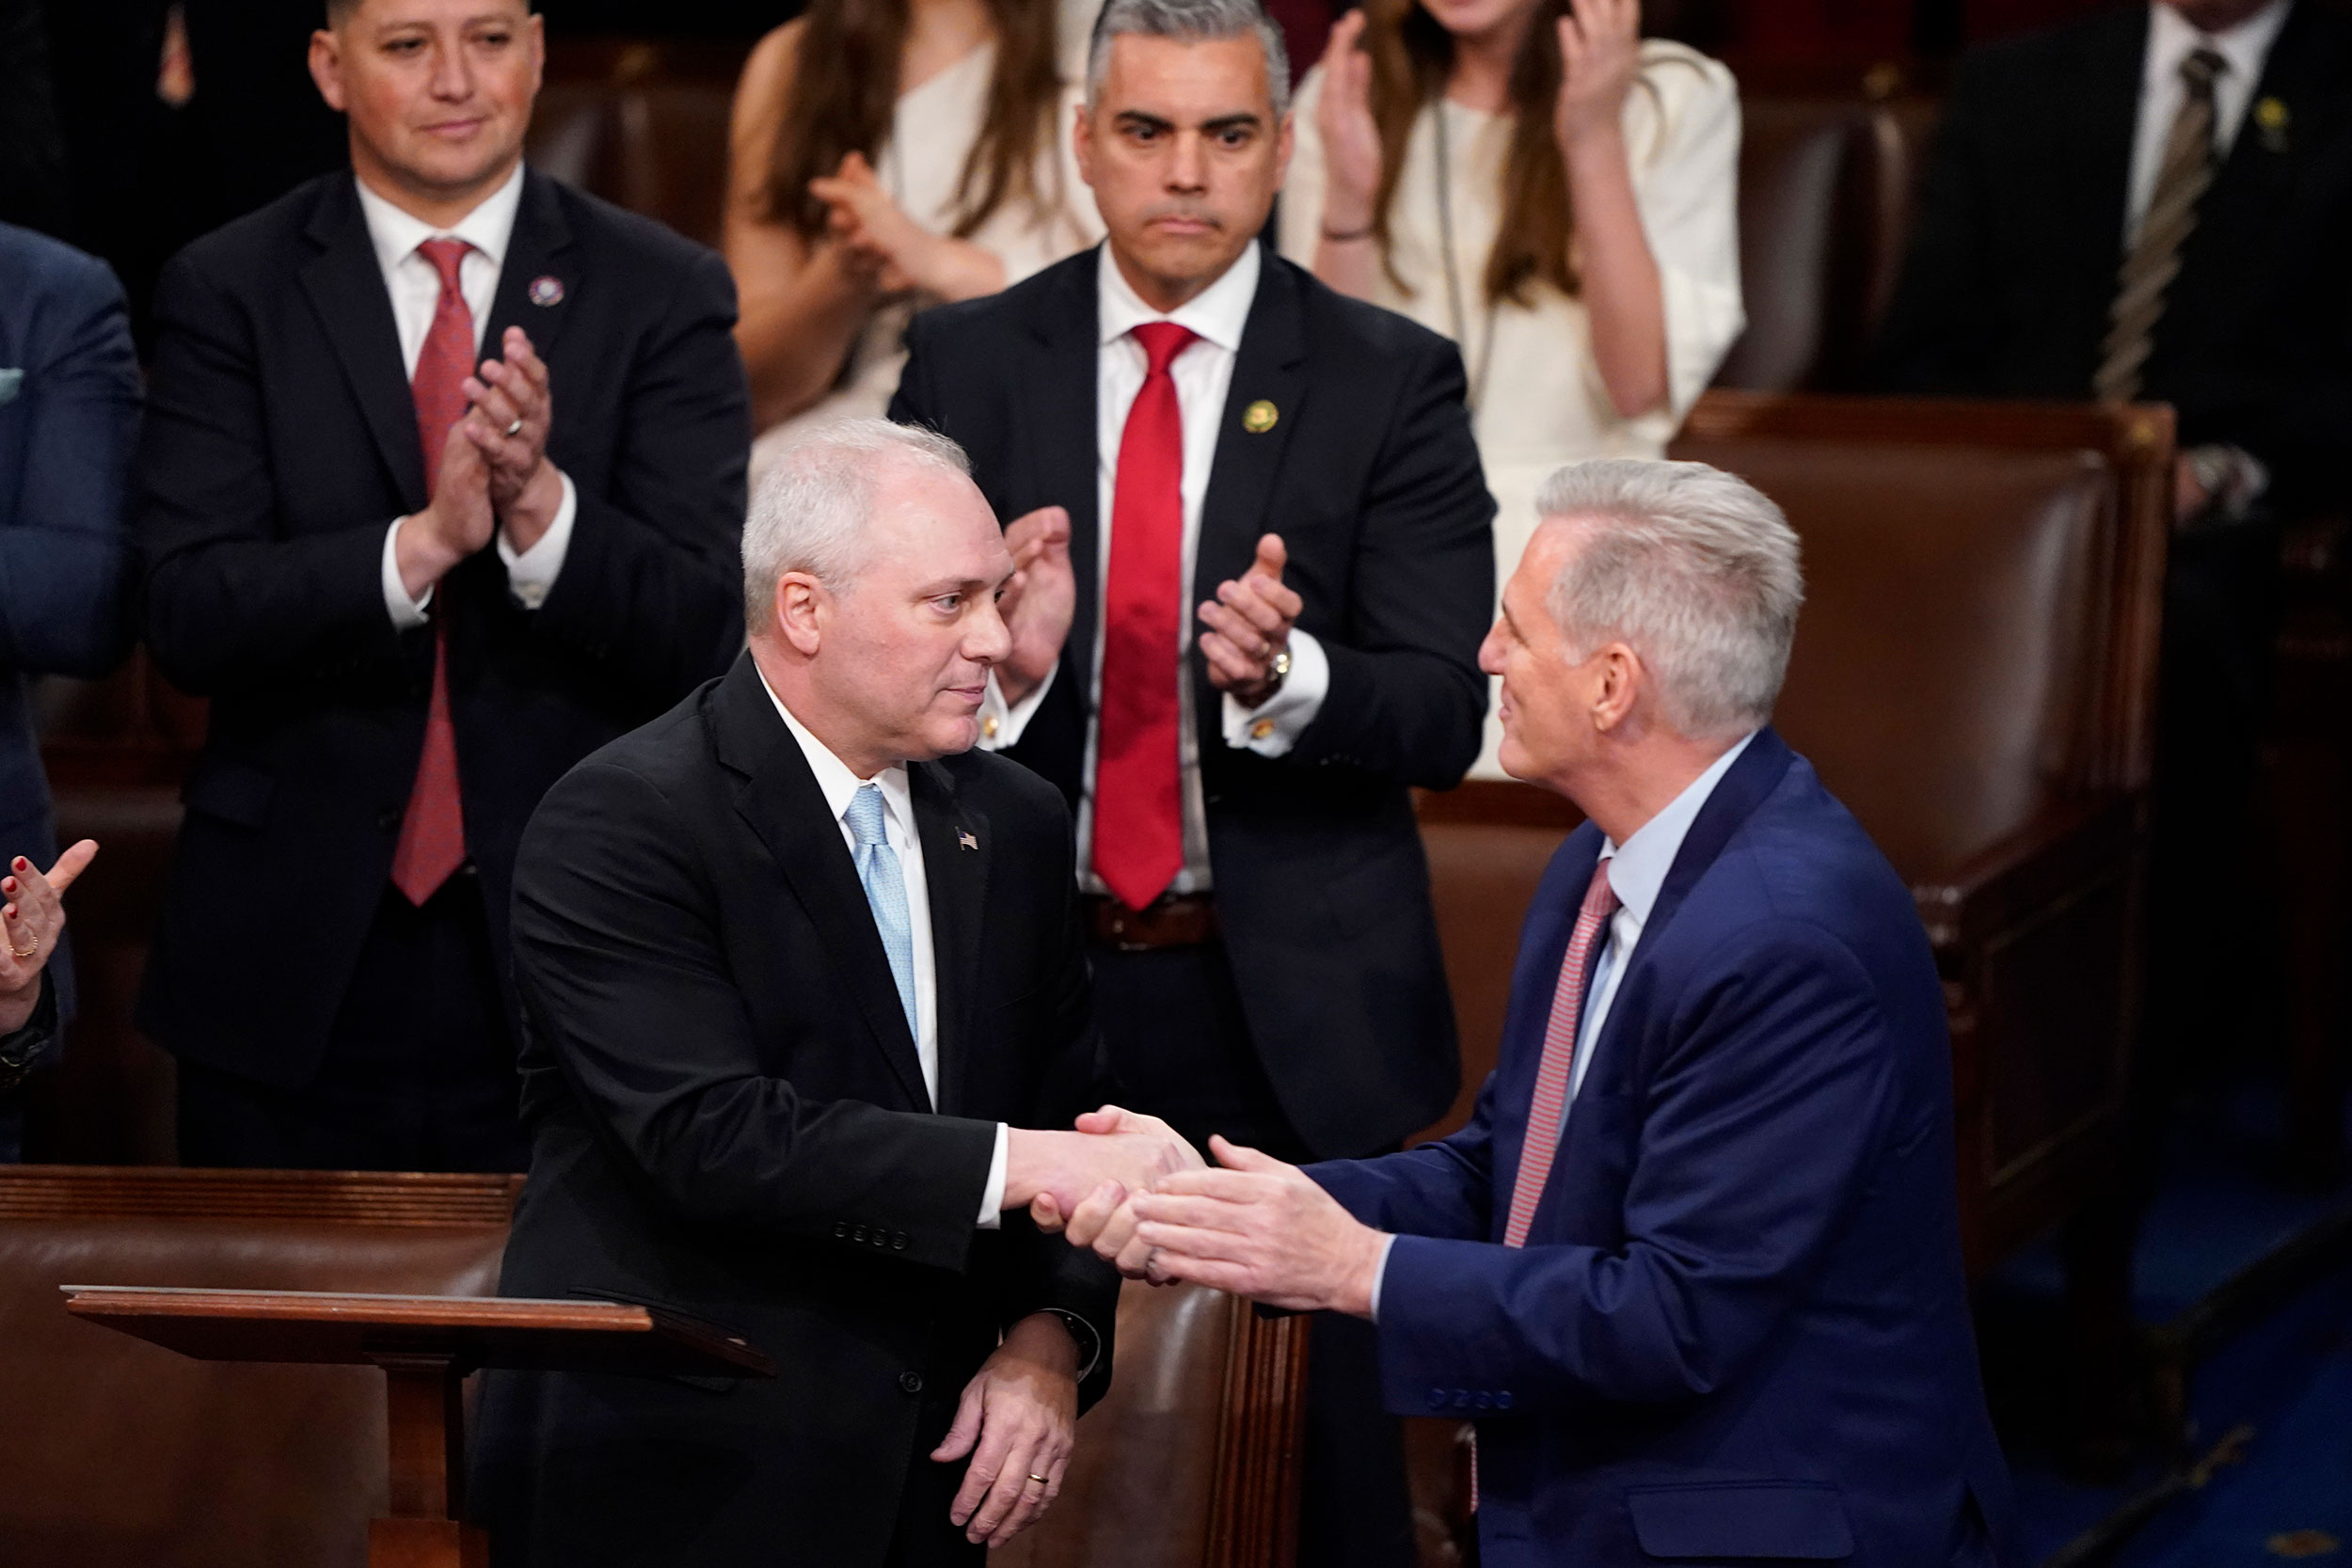 Rep. Steve Scalise, left, shakes hands with Rep. Kevin McCarthy after nominating him for House speaker before Tuesday's third round of voting.